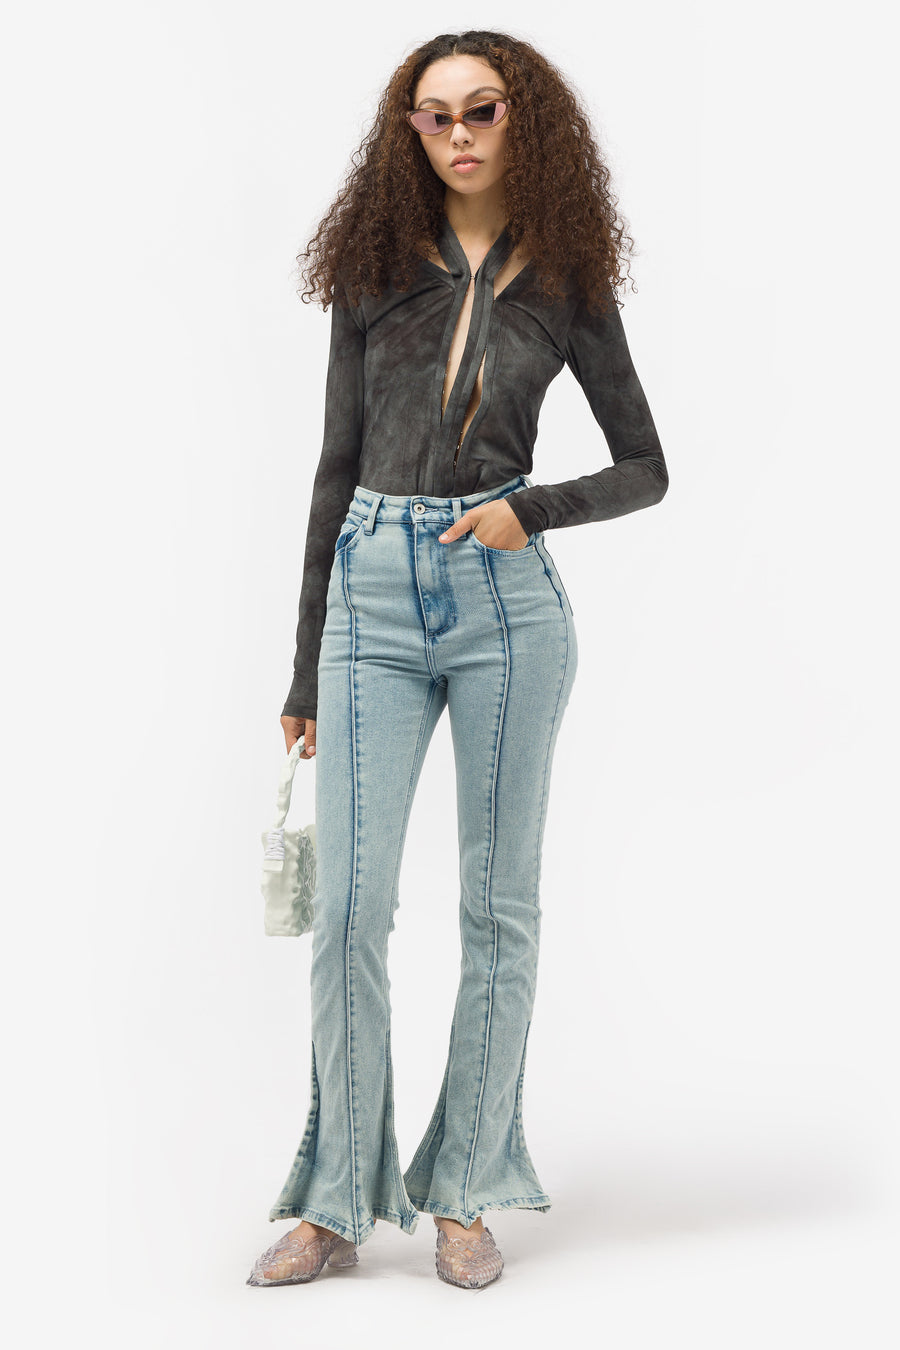 Y/Project - Women's Classic Trumpet Jeans in Vintage Ice Blue - Notre